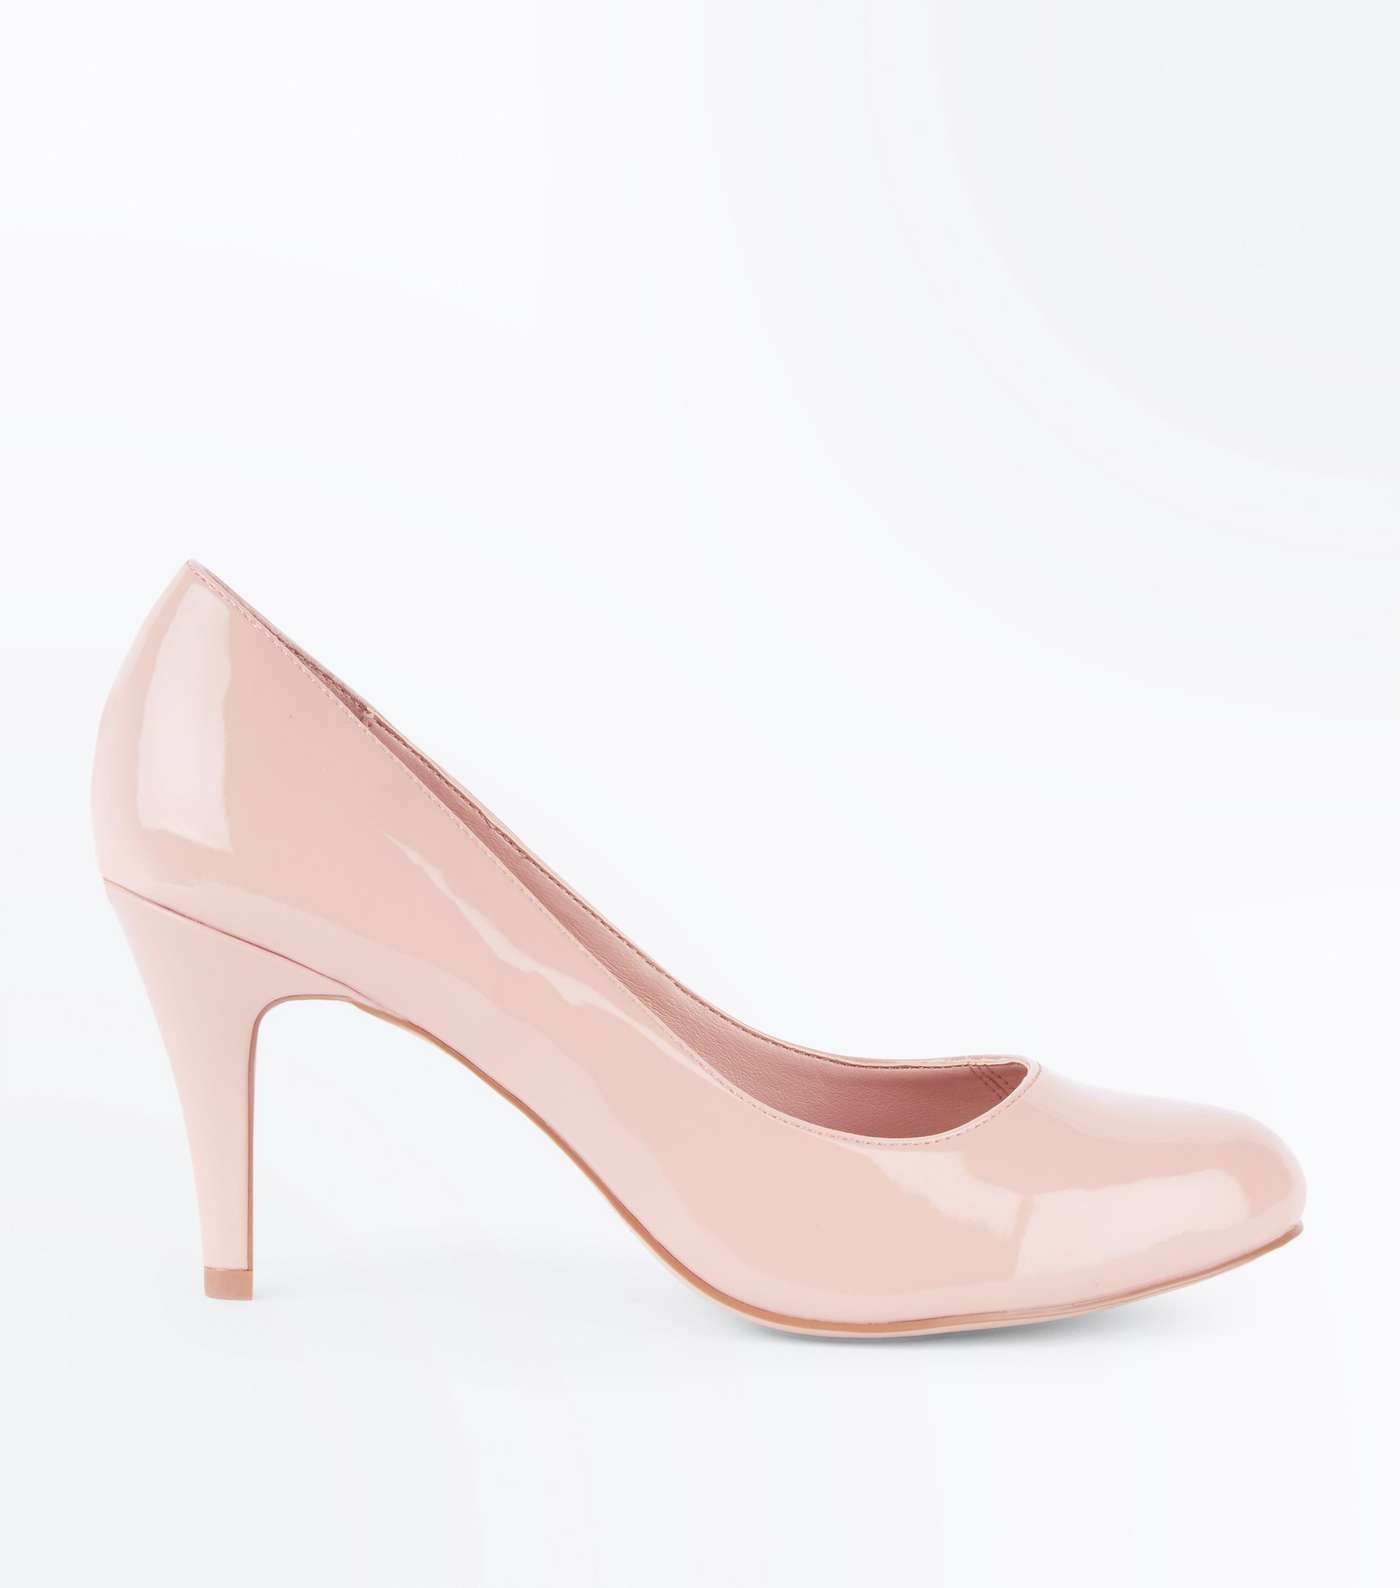 Wide Fit Nude Patent Round Toe Court Shoes